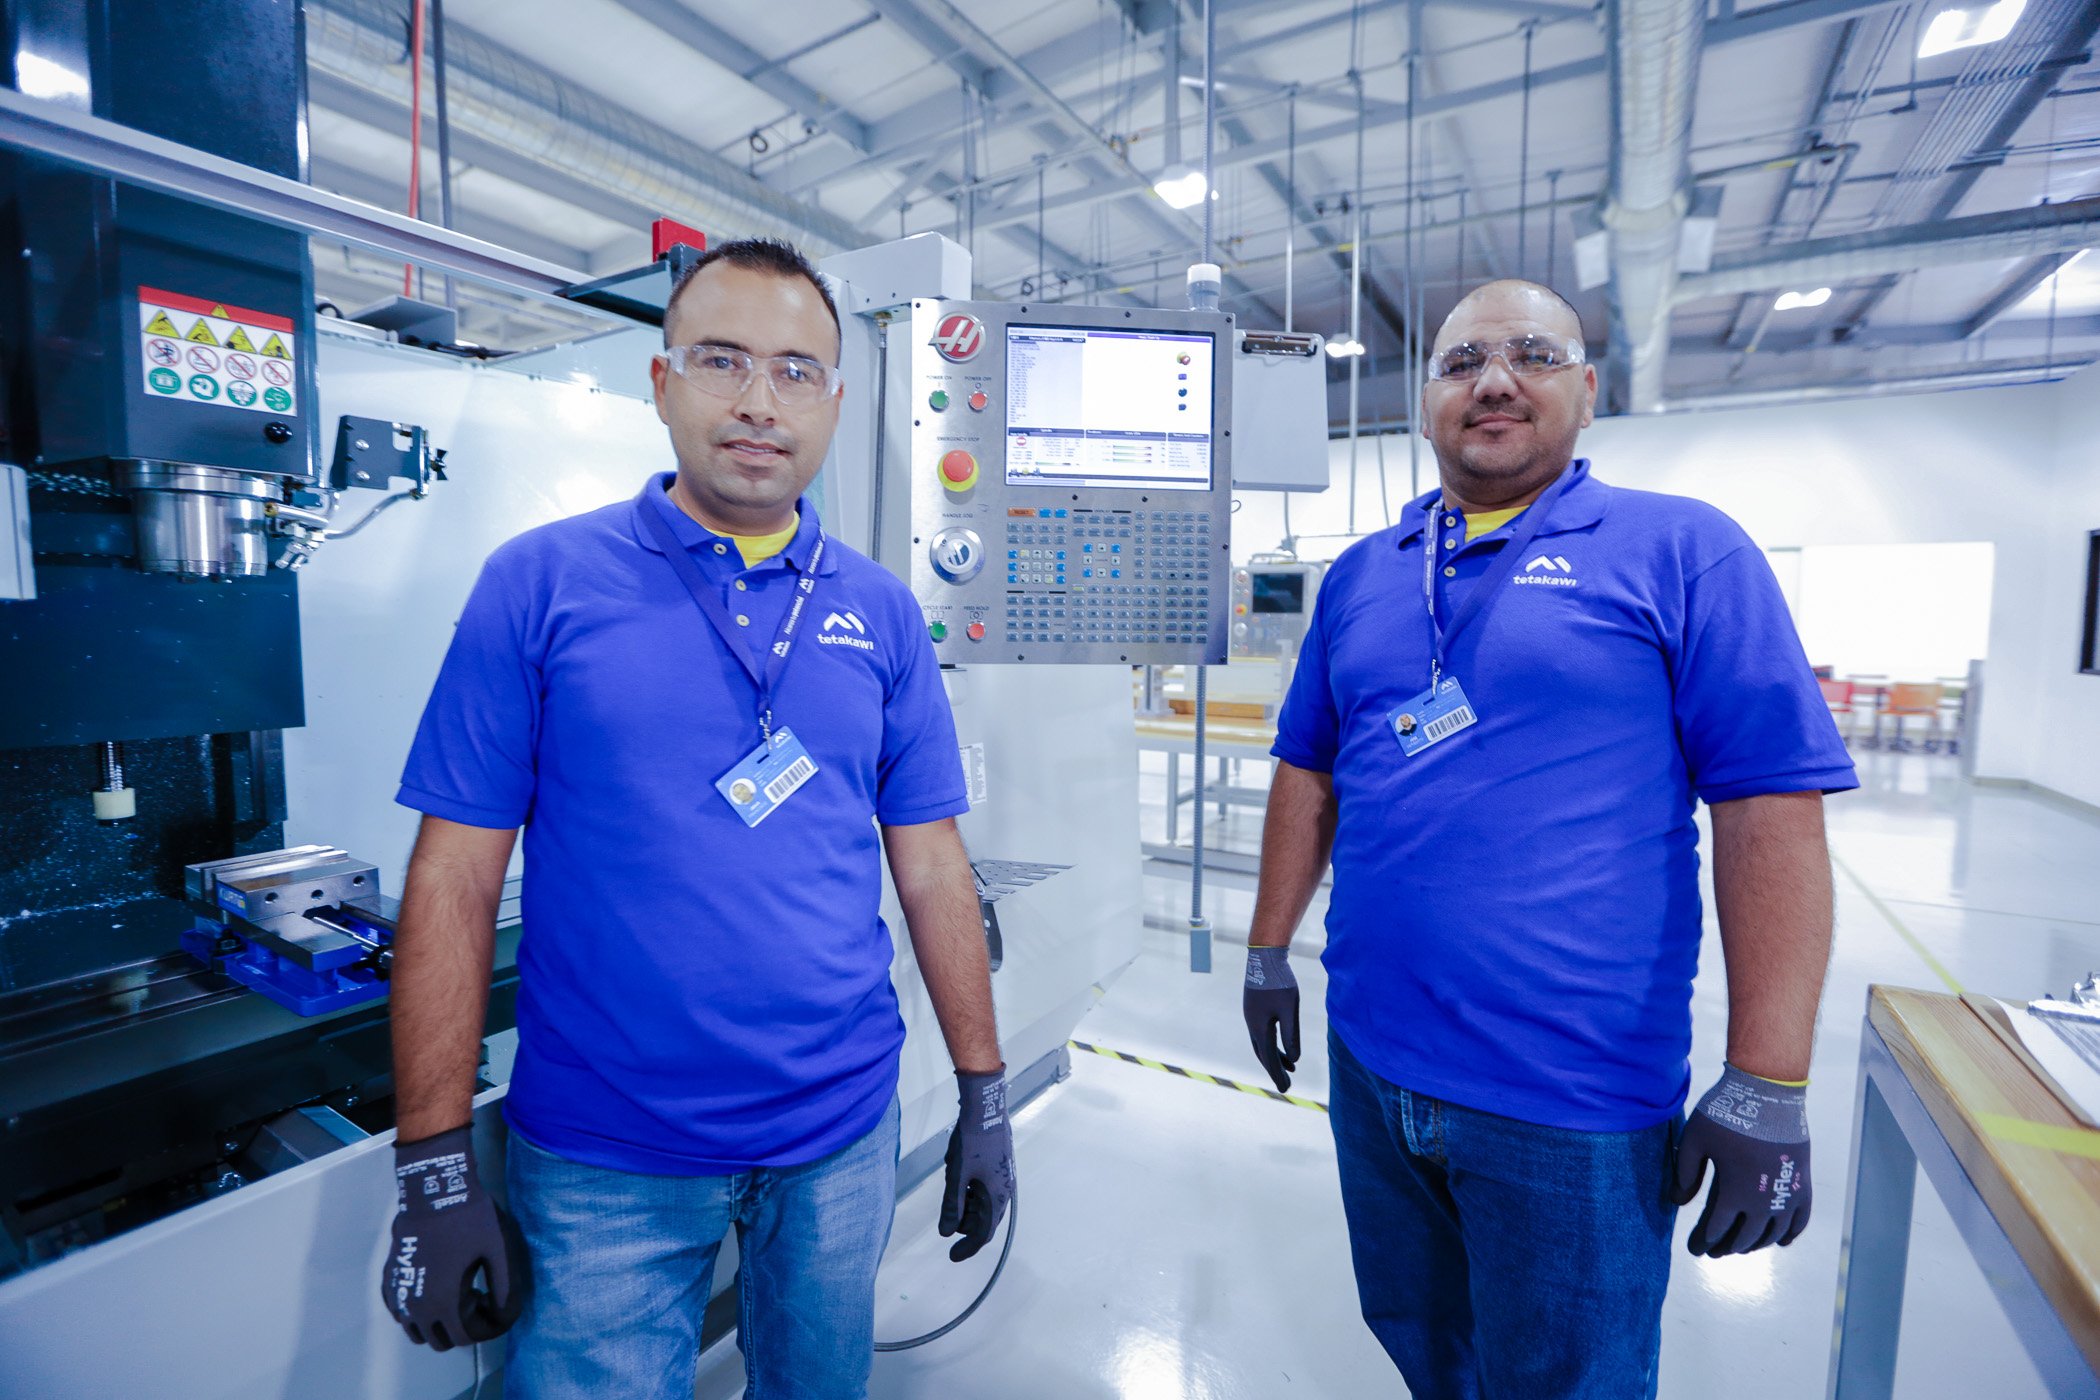 Maquiladora Employees in Mexico